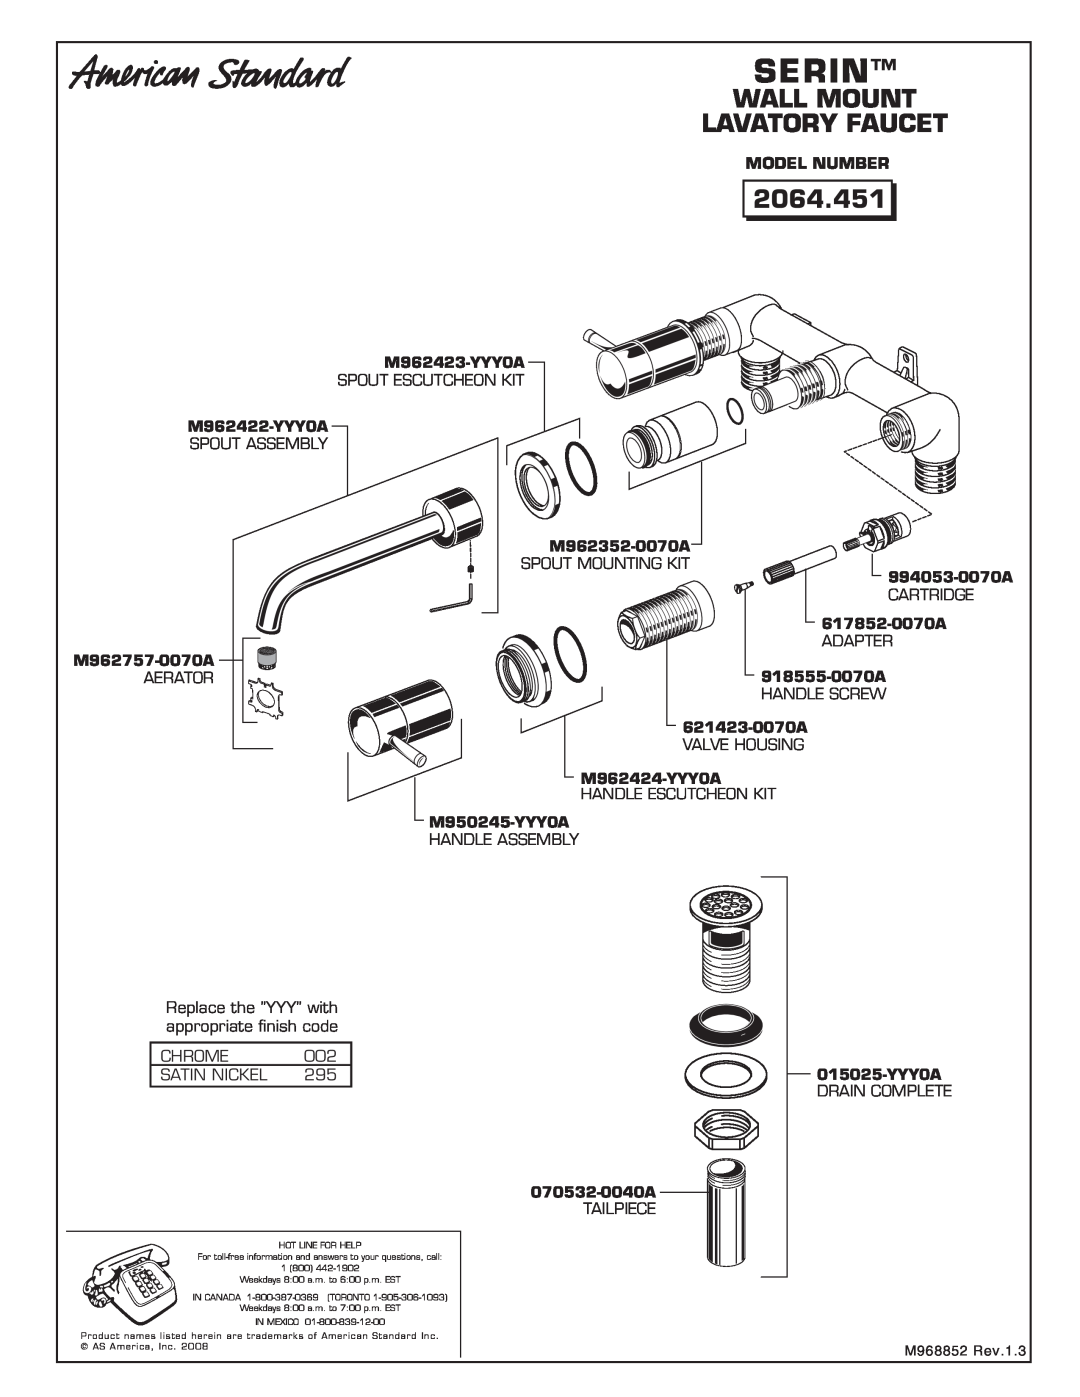 American Standard M968852 installation instructions Wall Mount Lavatory Faucet, Model Number, Serin, 2064.451 